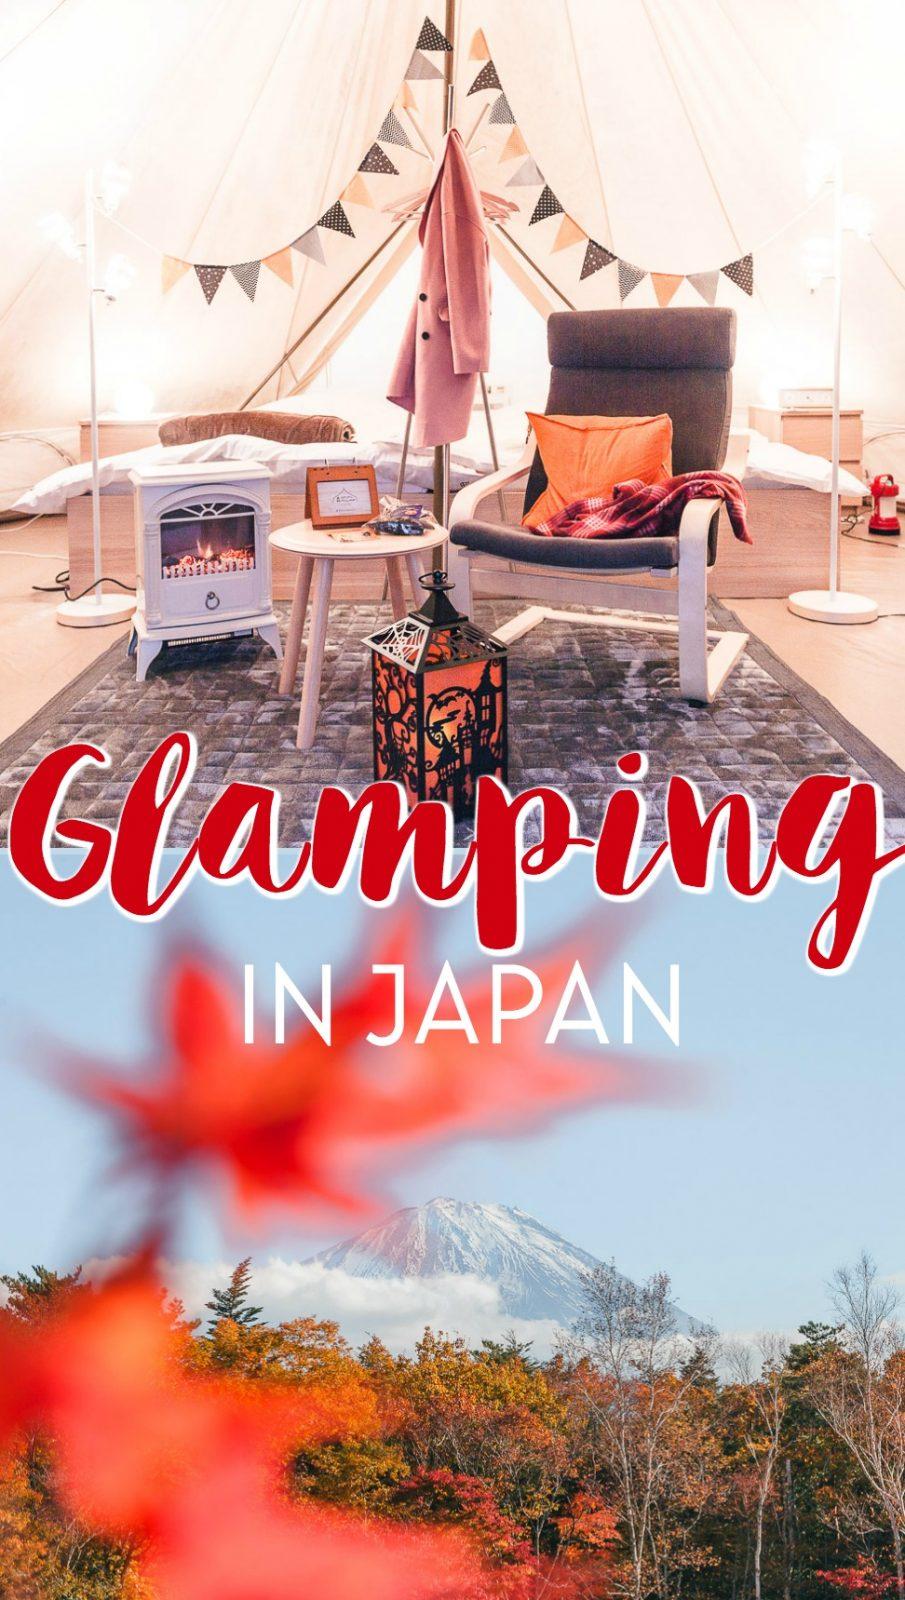 Camping in Japan: 3 Day Itinerary from Tokyo to Mount Fuji with Japanese glamping accommodation